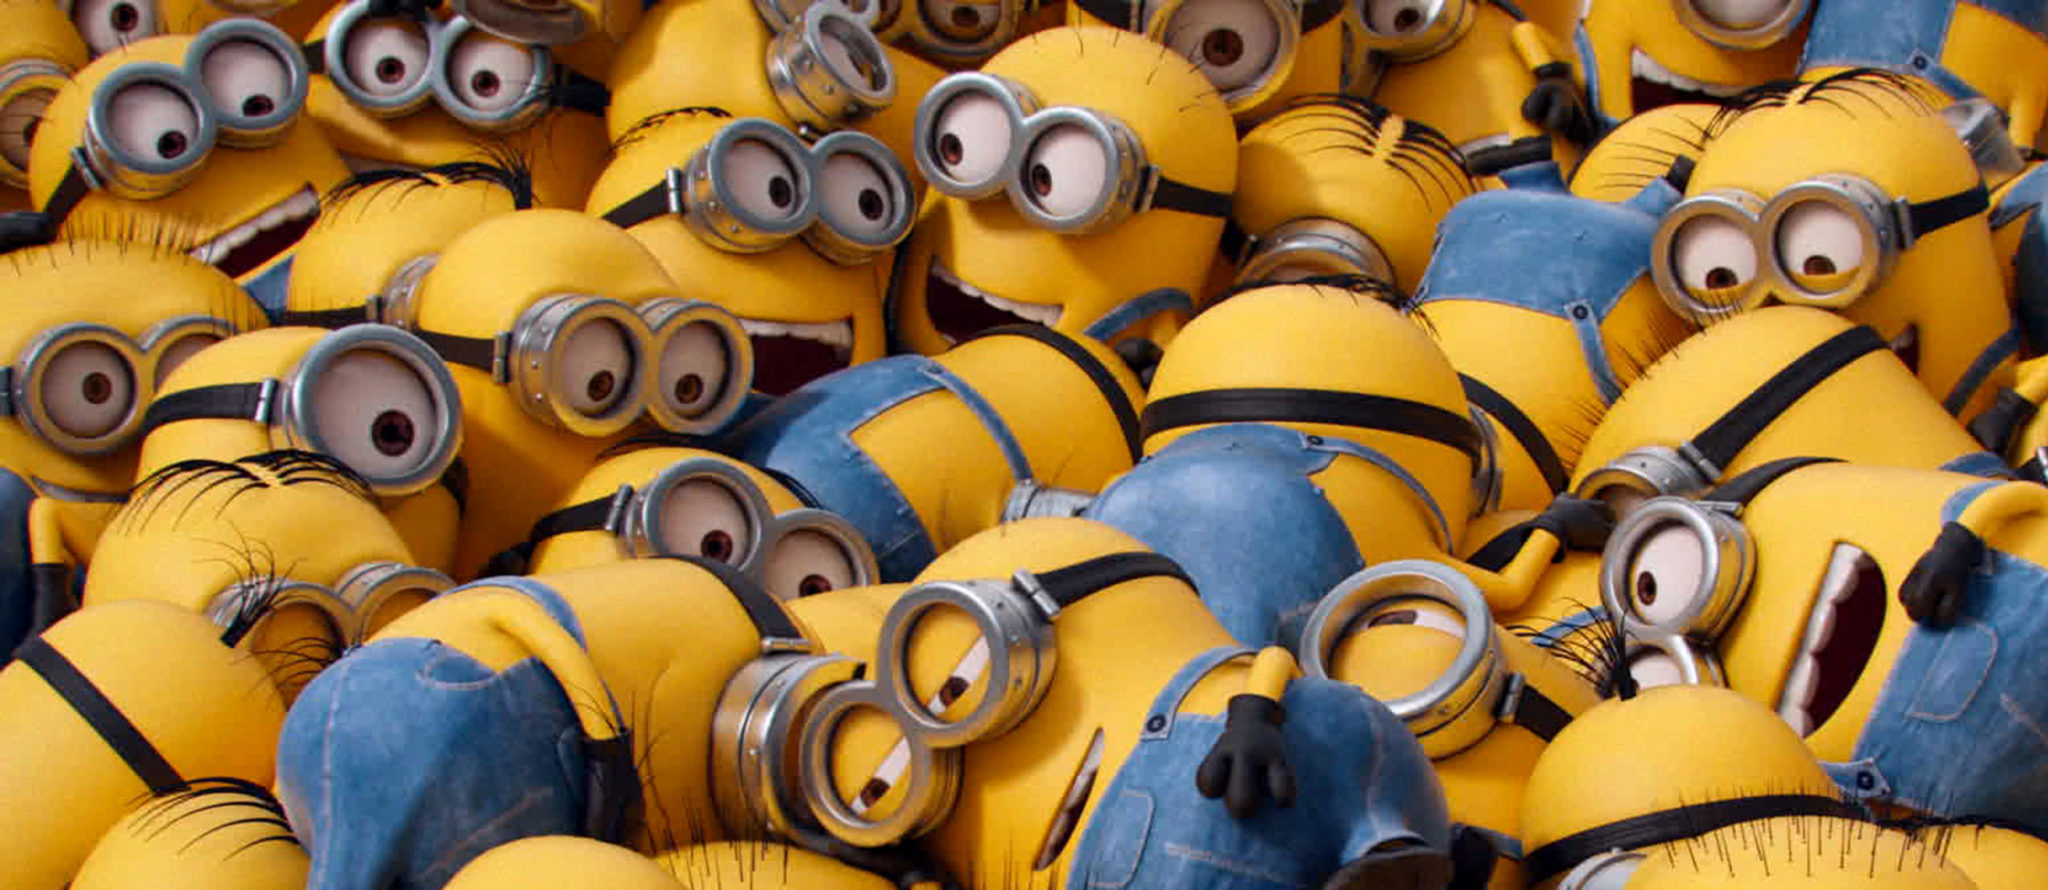 Cinemas Warn Minions Movie Viewers Not To Come In Suits | SPIN1038